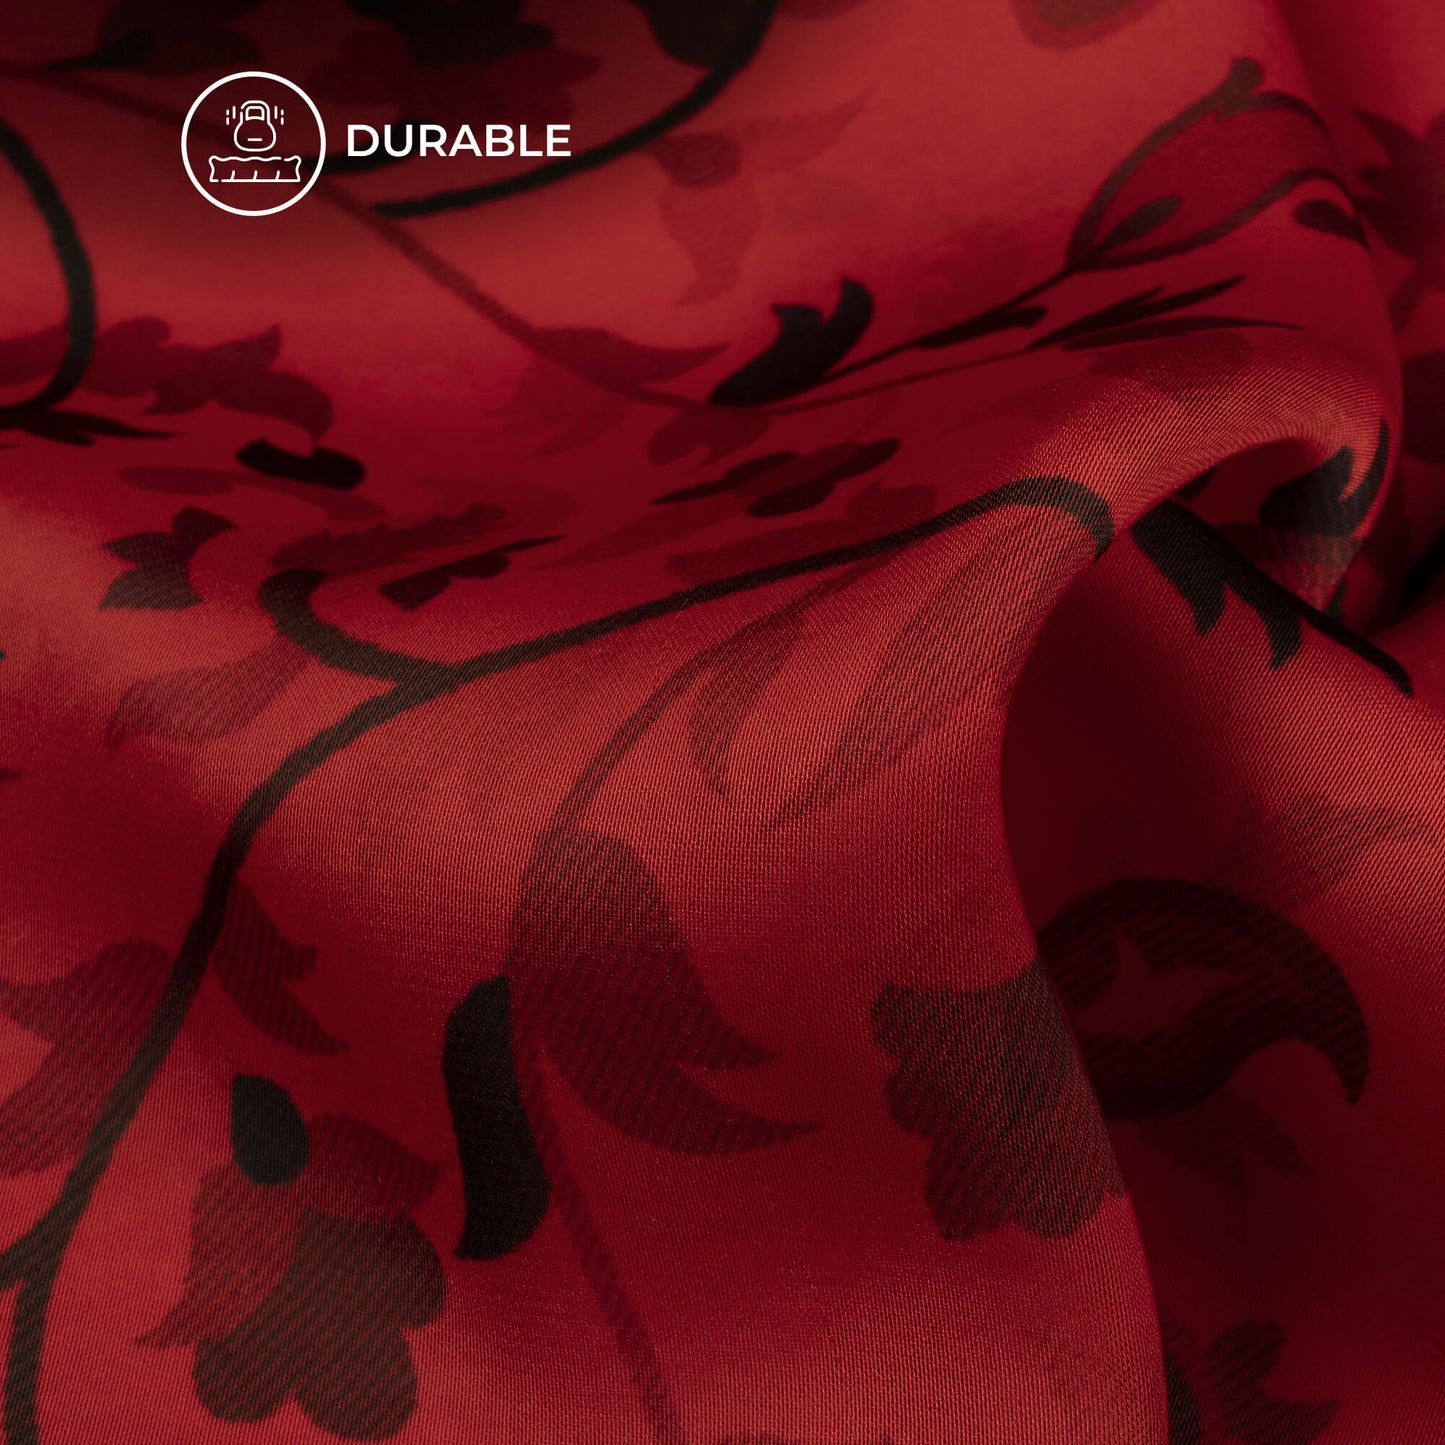 Vermilion Red Paisley Digital Print Imported Satin Fabric